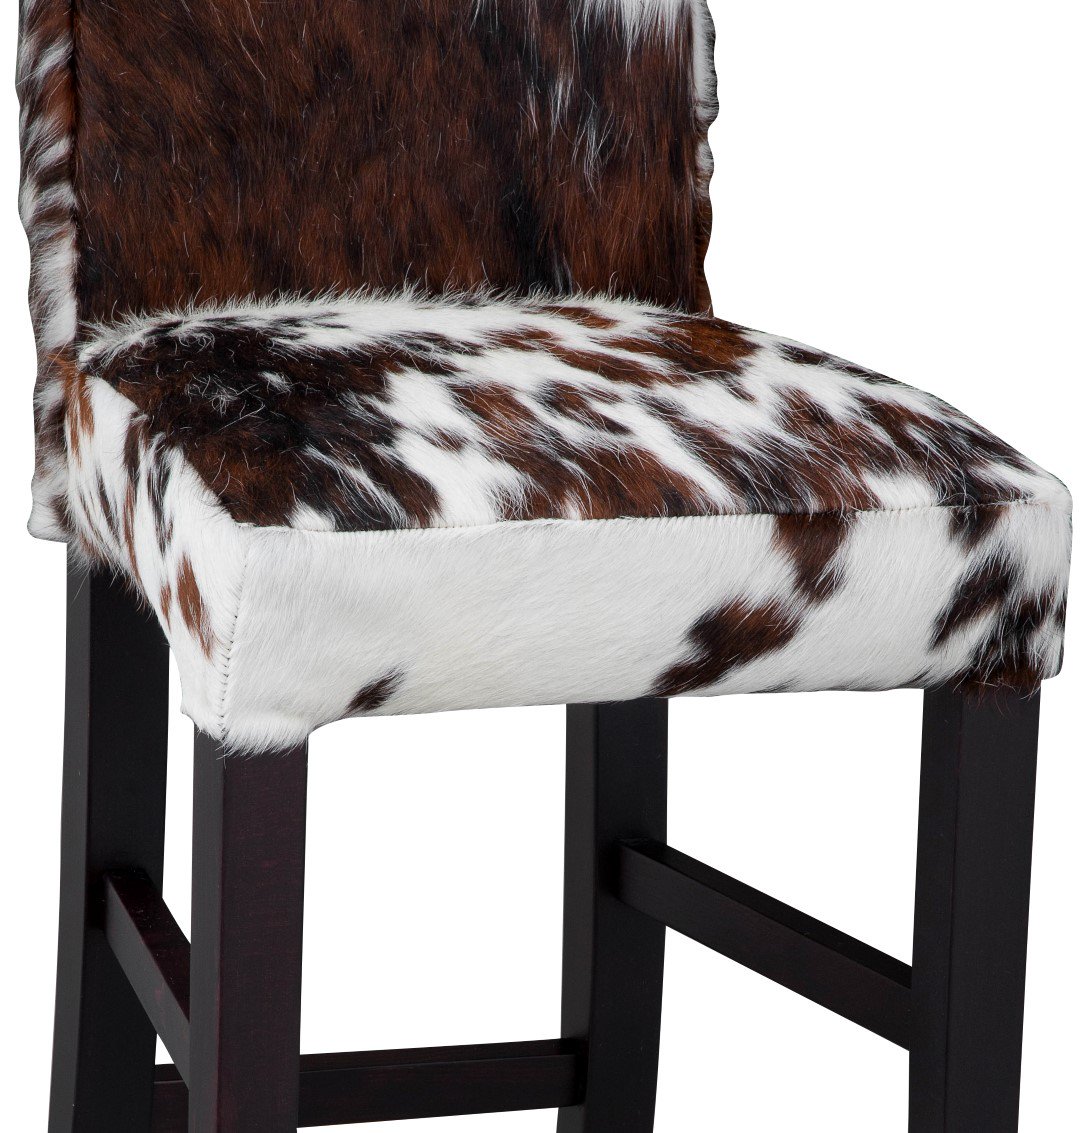 City Cows On Twitter We Have Added A Few Barstools Into The Sale